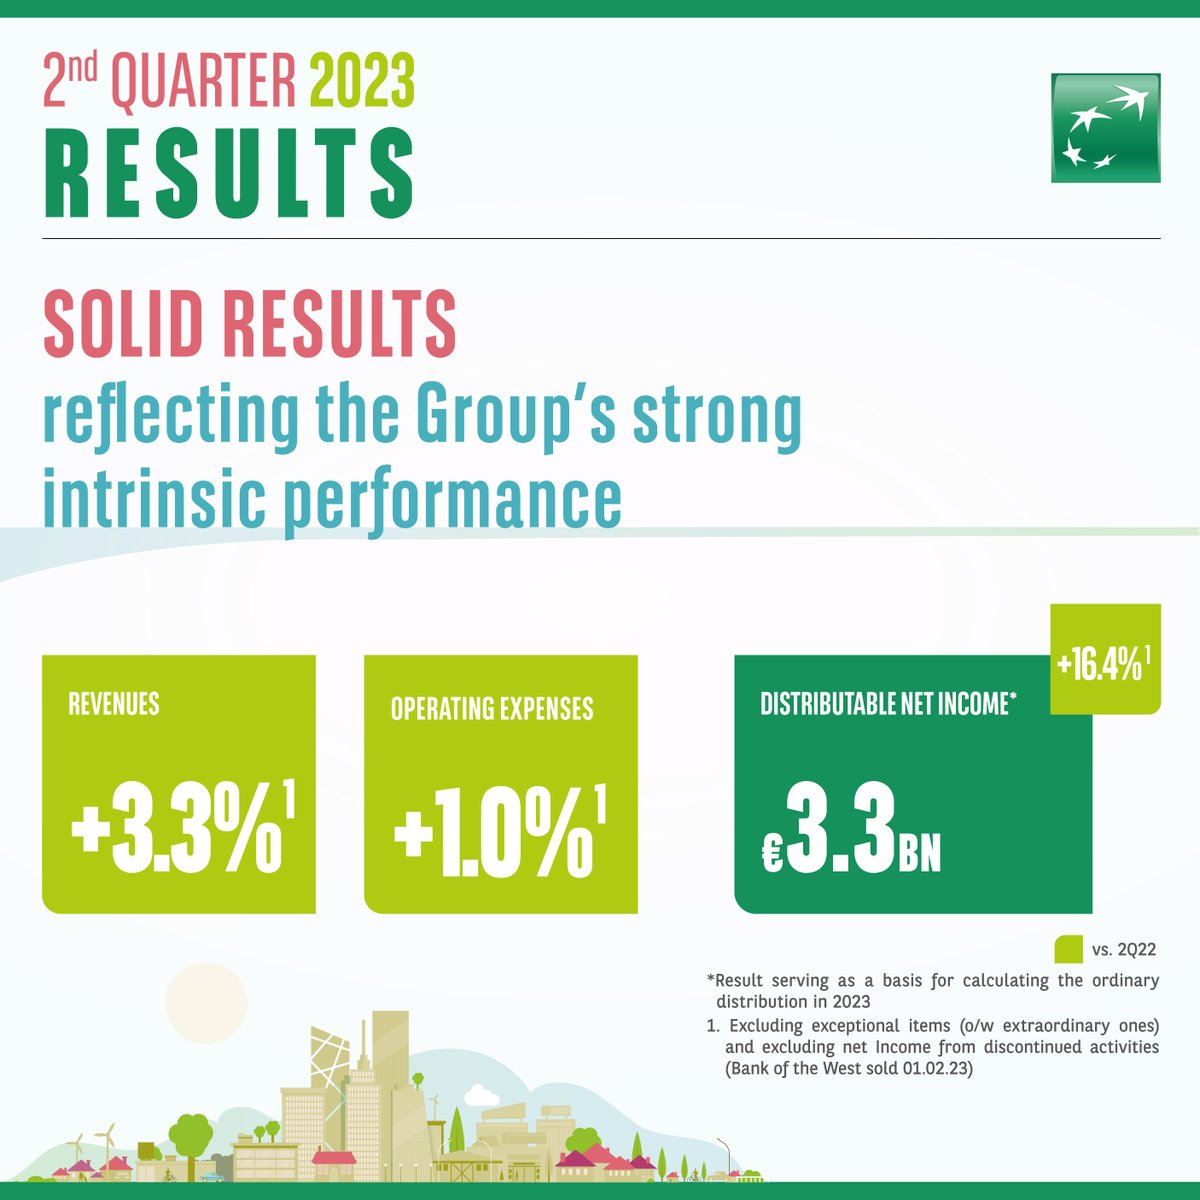 #BNPPResults The BNP Paribas group results today are solid and reflect the Group’s robust intrinsic performance and constitute a solid base for achieving the objectives of the GTS 2025 plan. bnpp.lk/2Q2023